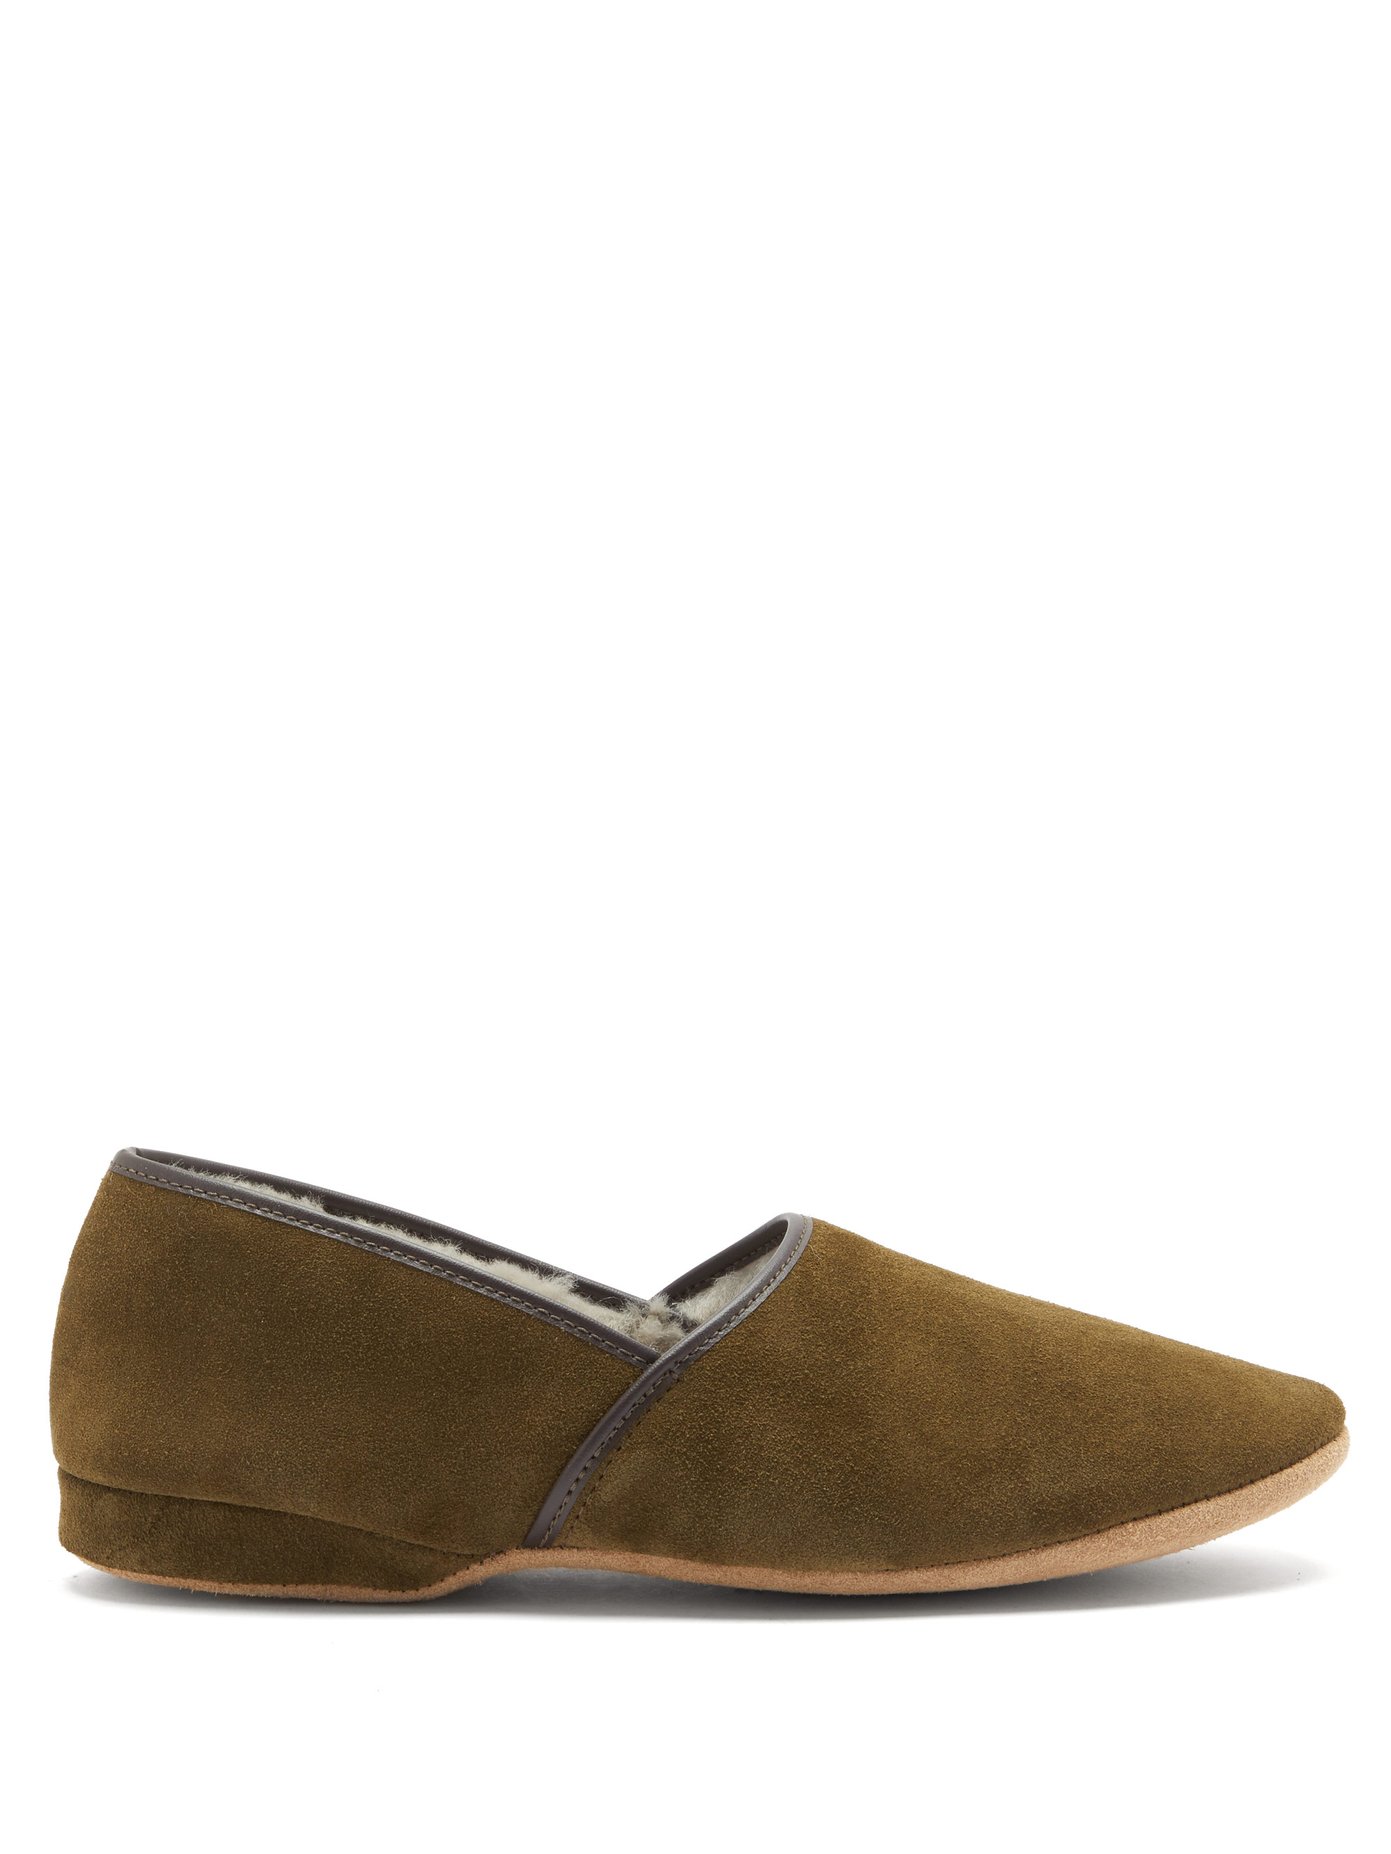 Crawford shearling-lined suede slippers 